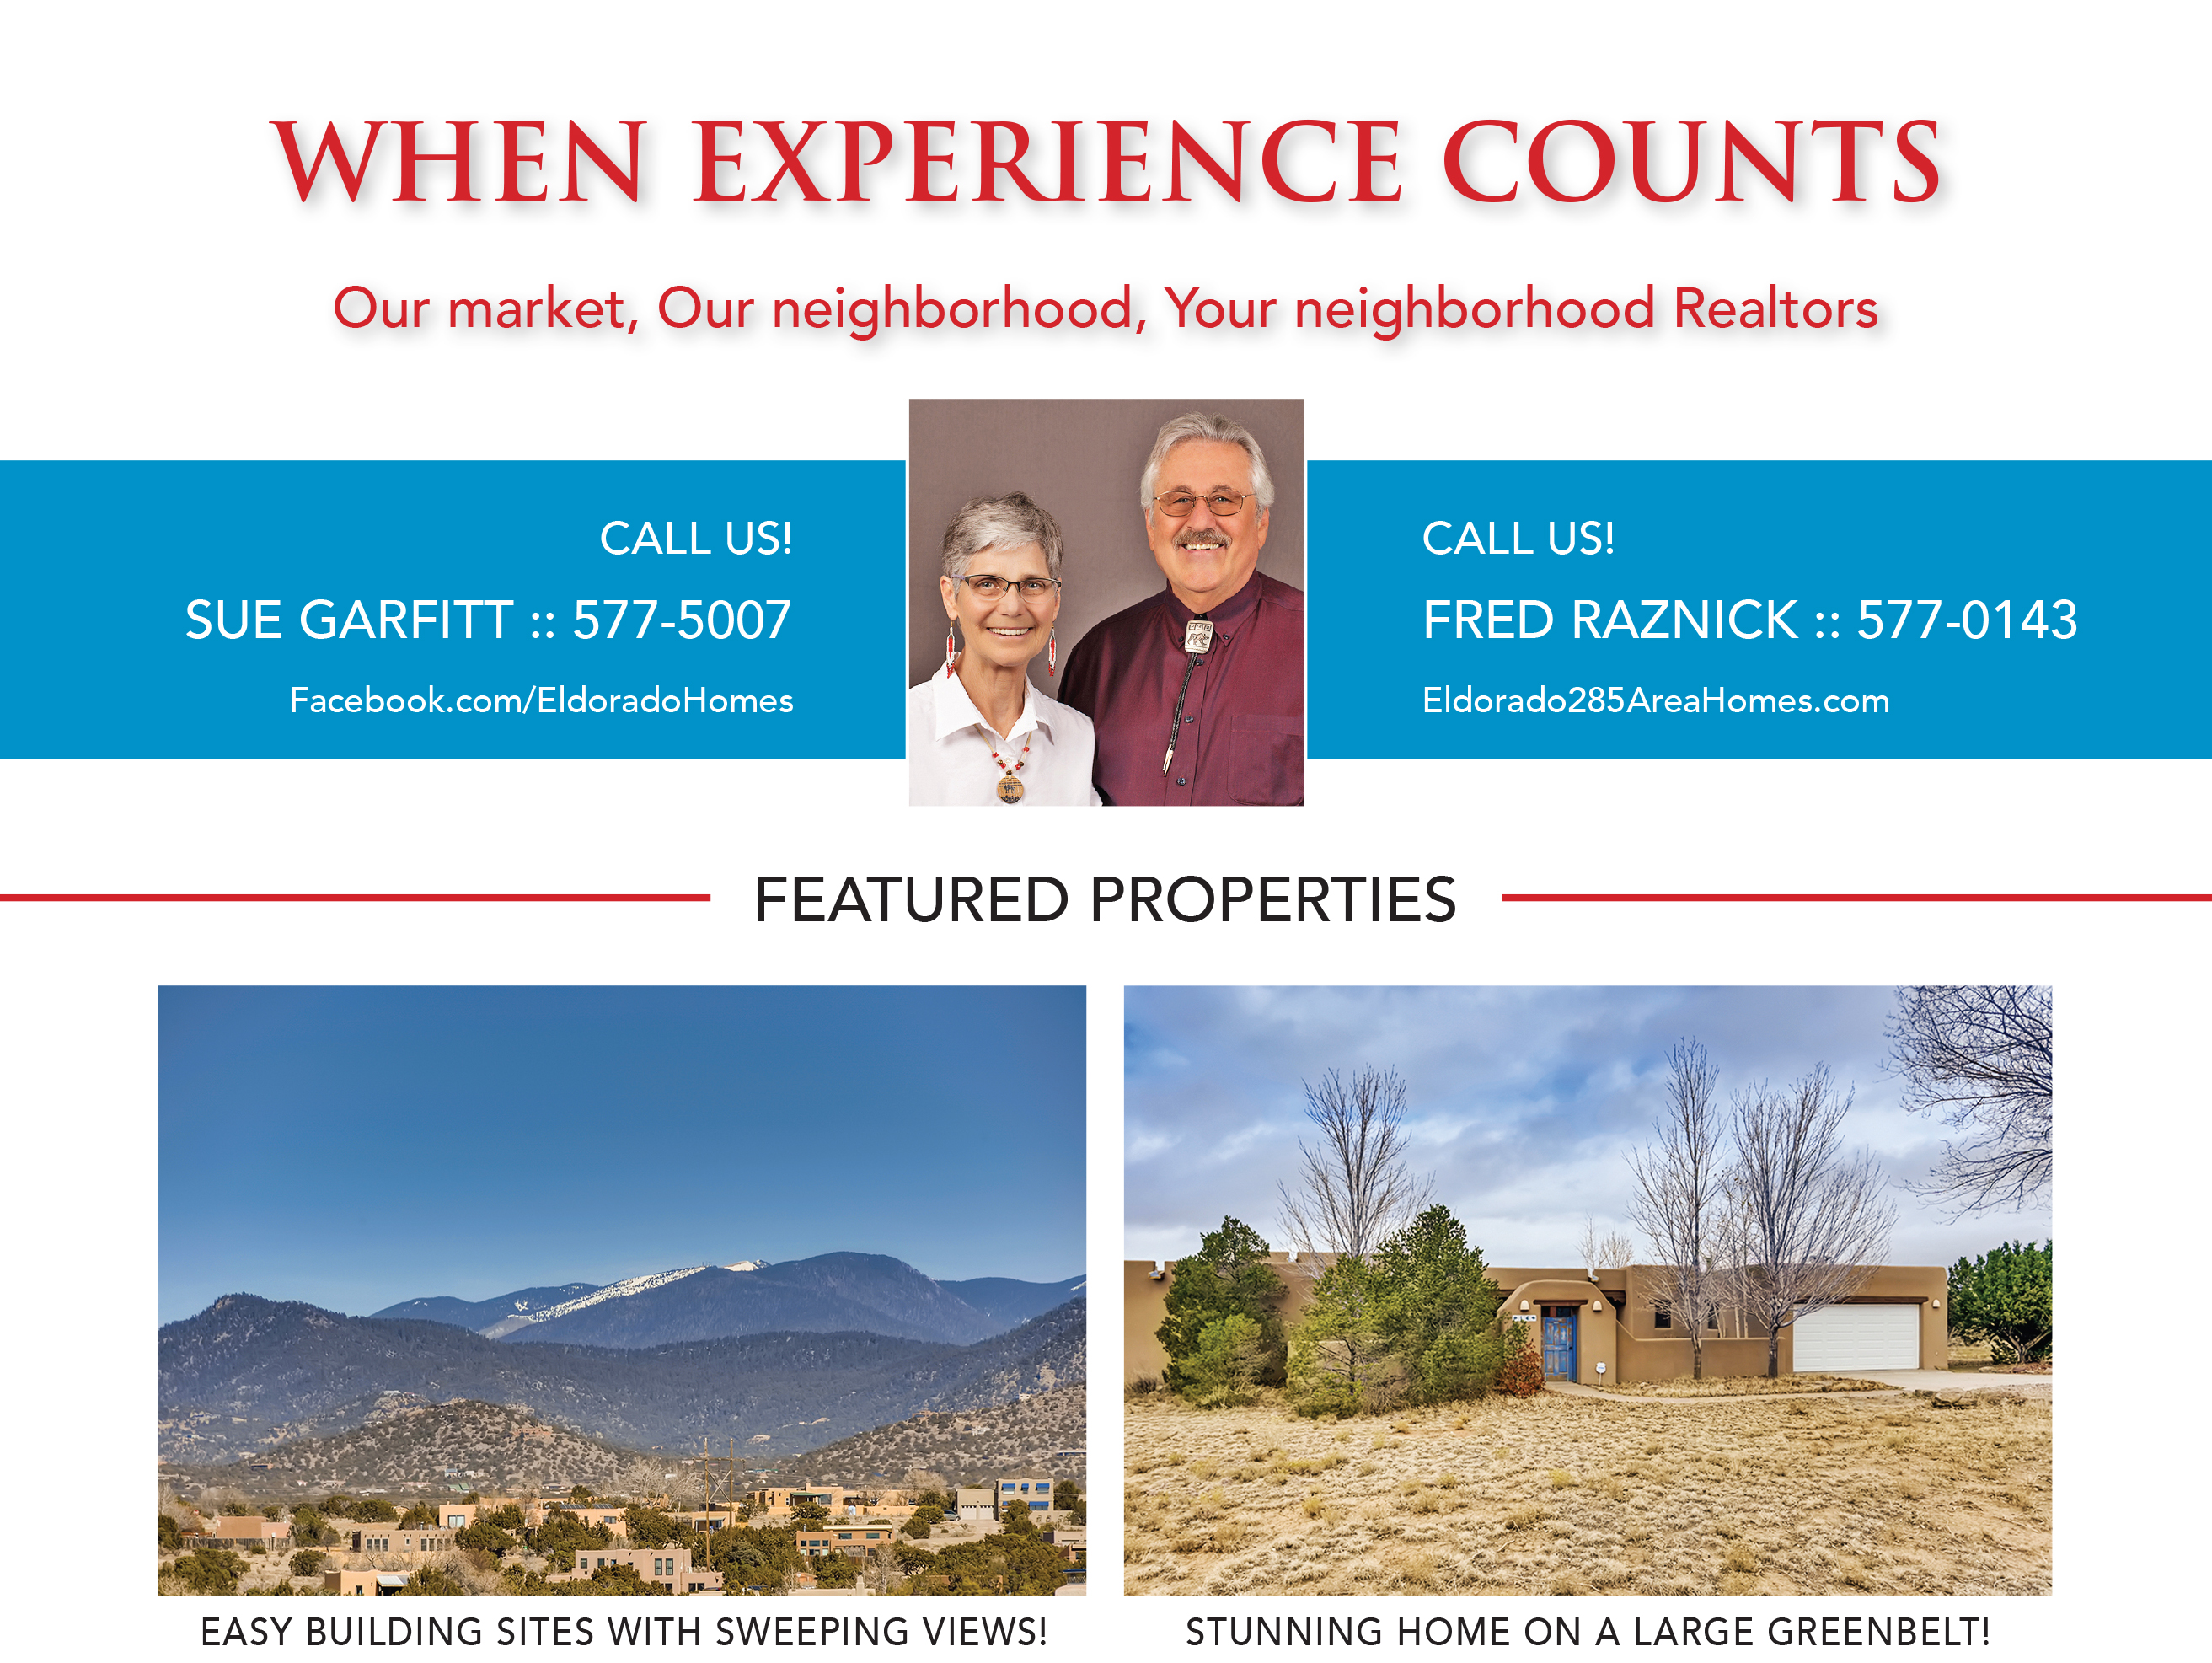 Did you see our ad in the March issue of Eldorado Living? 